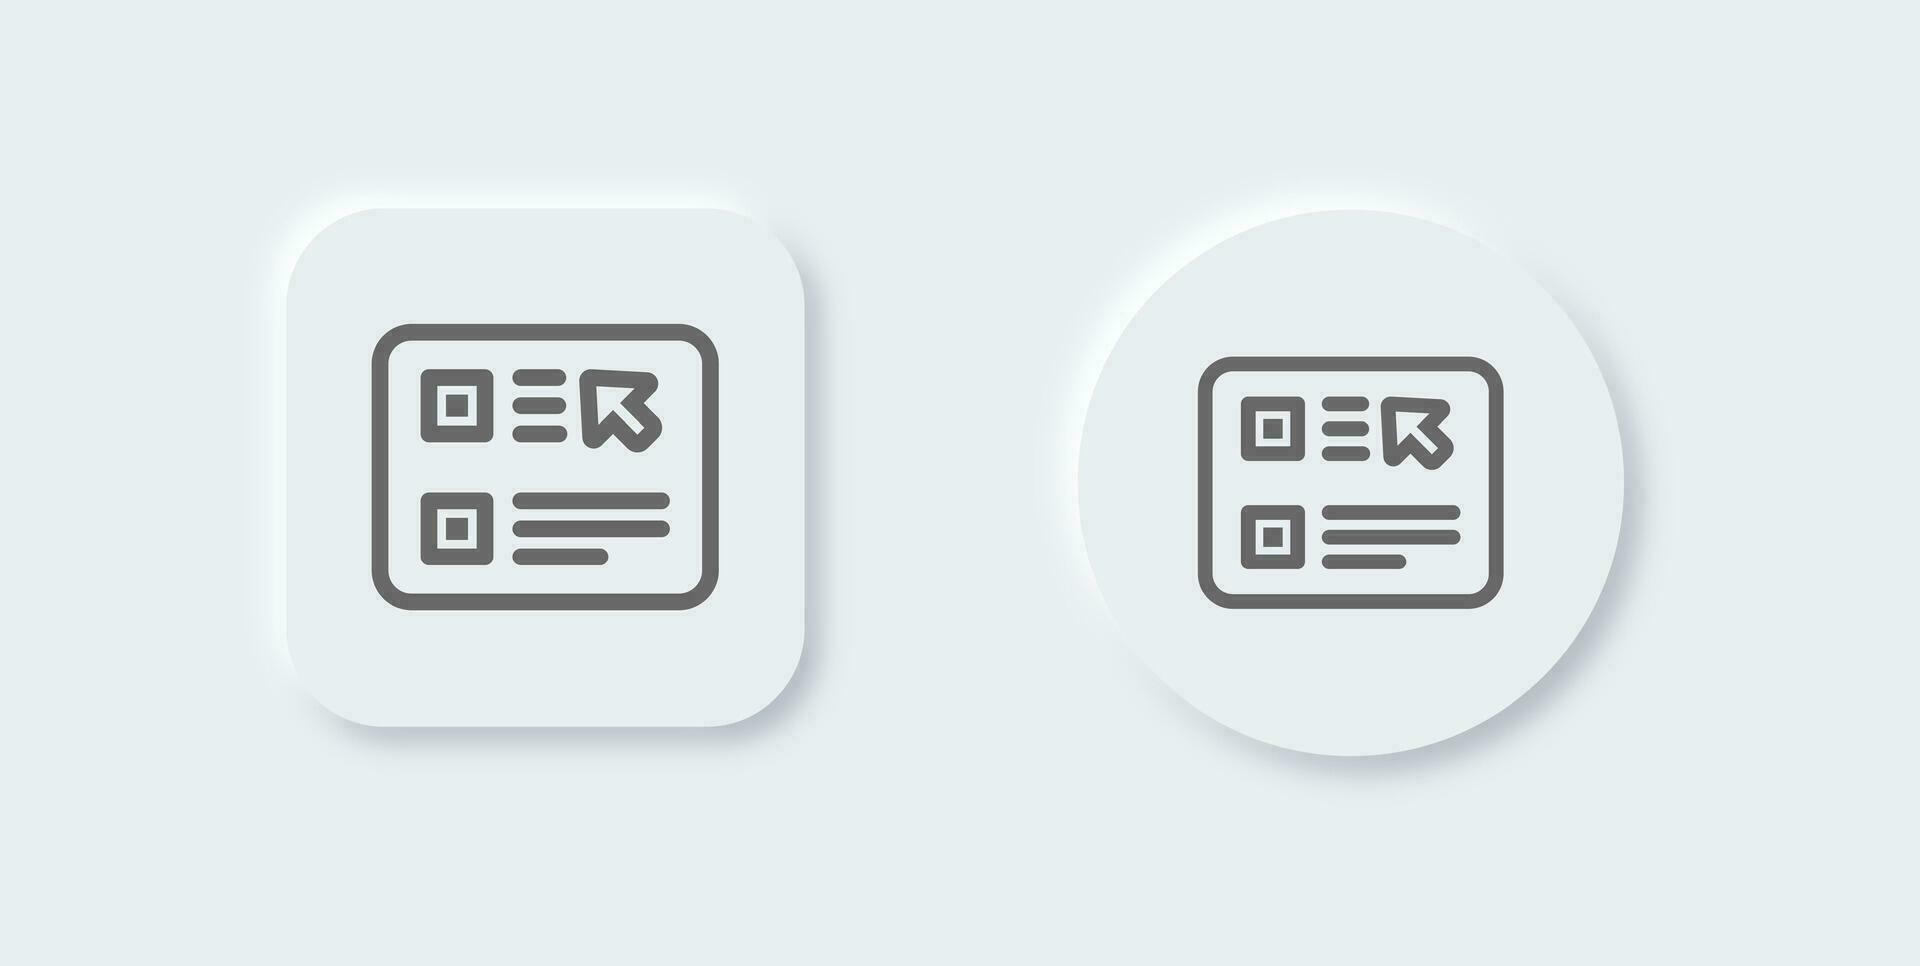 Choice line icon in neomorphic design style. Choose button signs vector illustration.